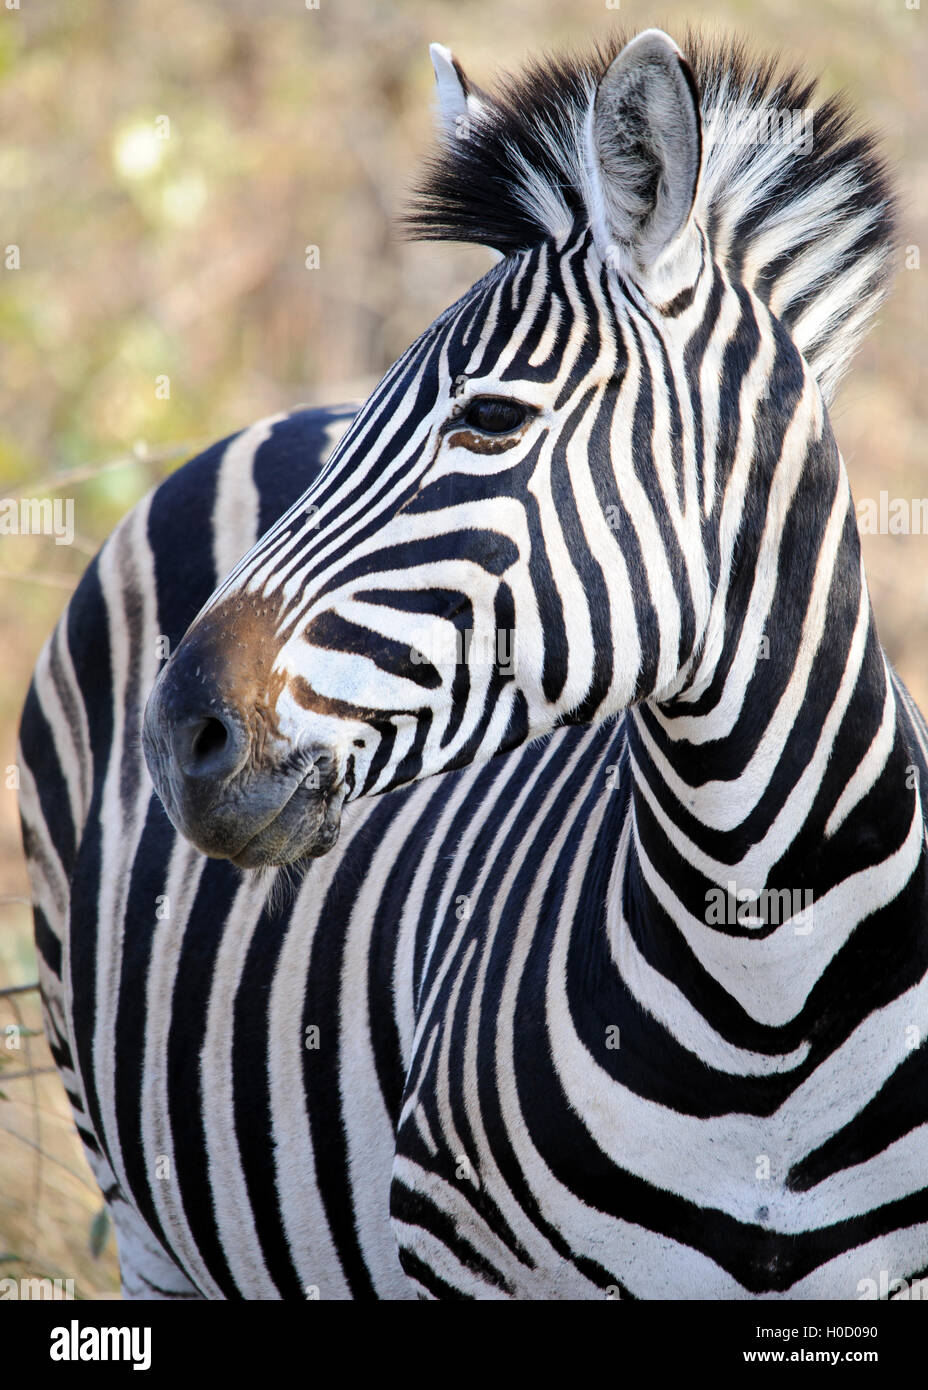 Close-up of a Zebra looking from the side. Burchell's zebra (Equus quagga burchellii), South Africa Stock Photo